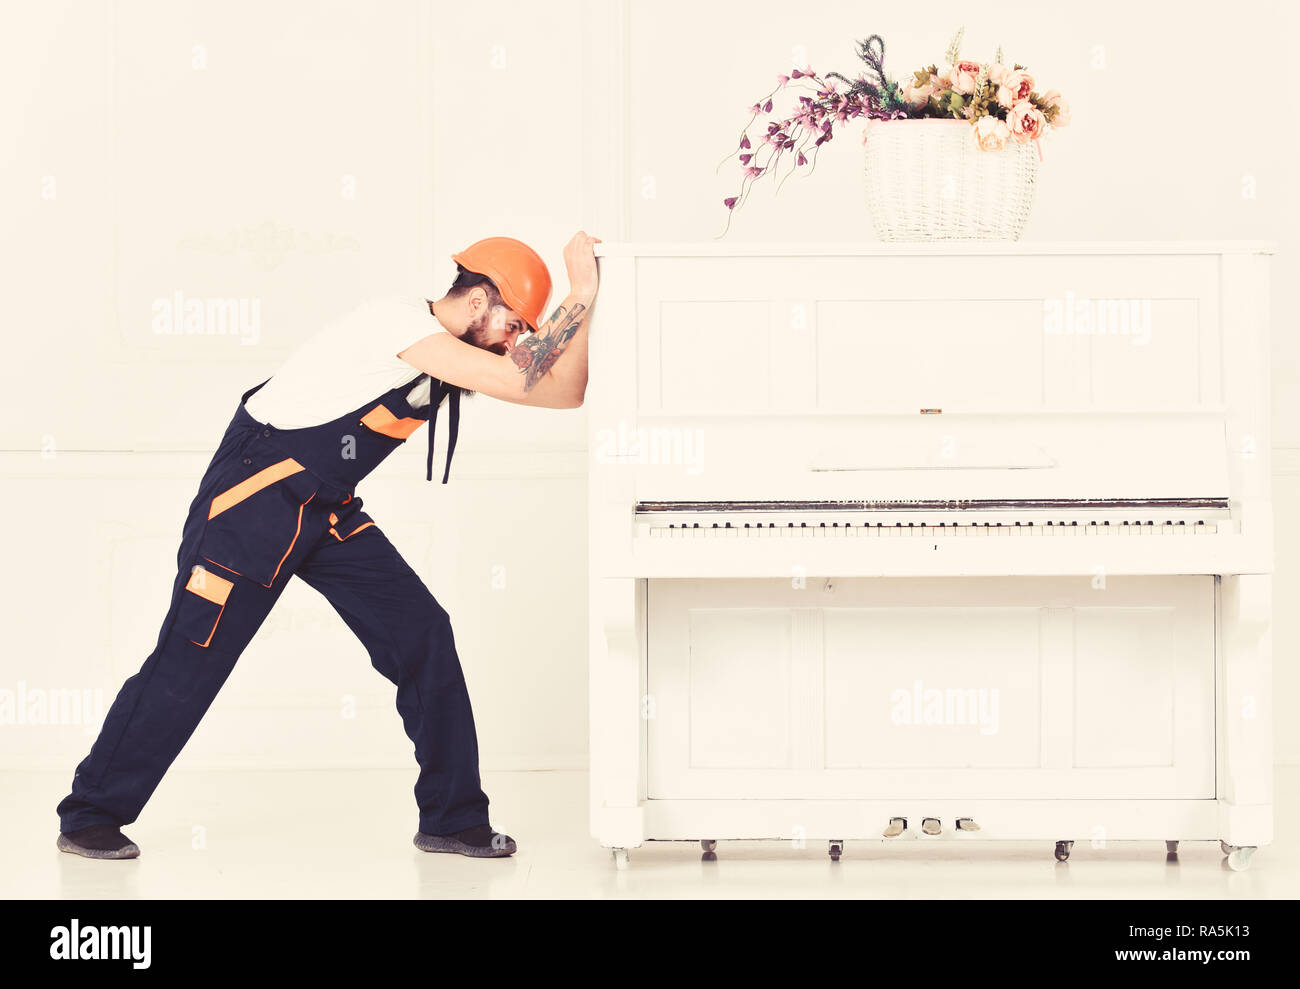 Man with beard worker in helmet and overalls pushes, efforts to move piano, white background. Heavy loads concept. Courier delivers furniture, move out, relocation. Loader moves piano instrument. Stock Photo